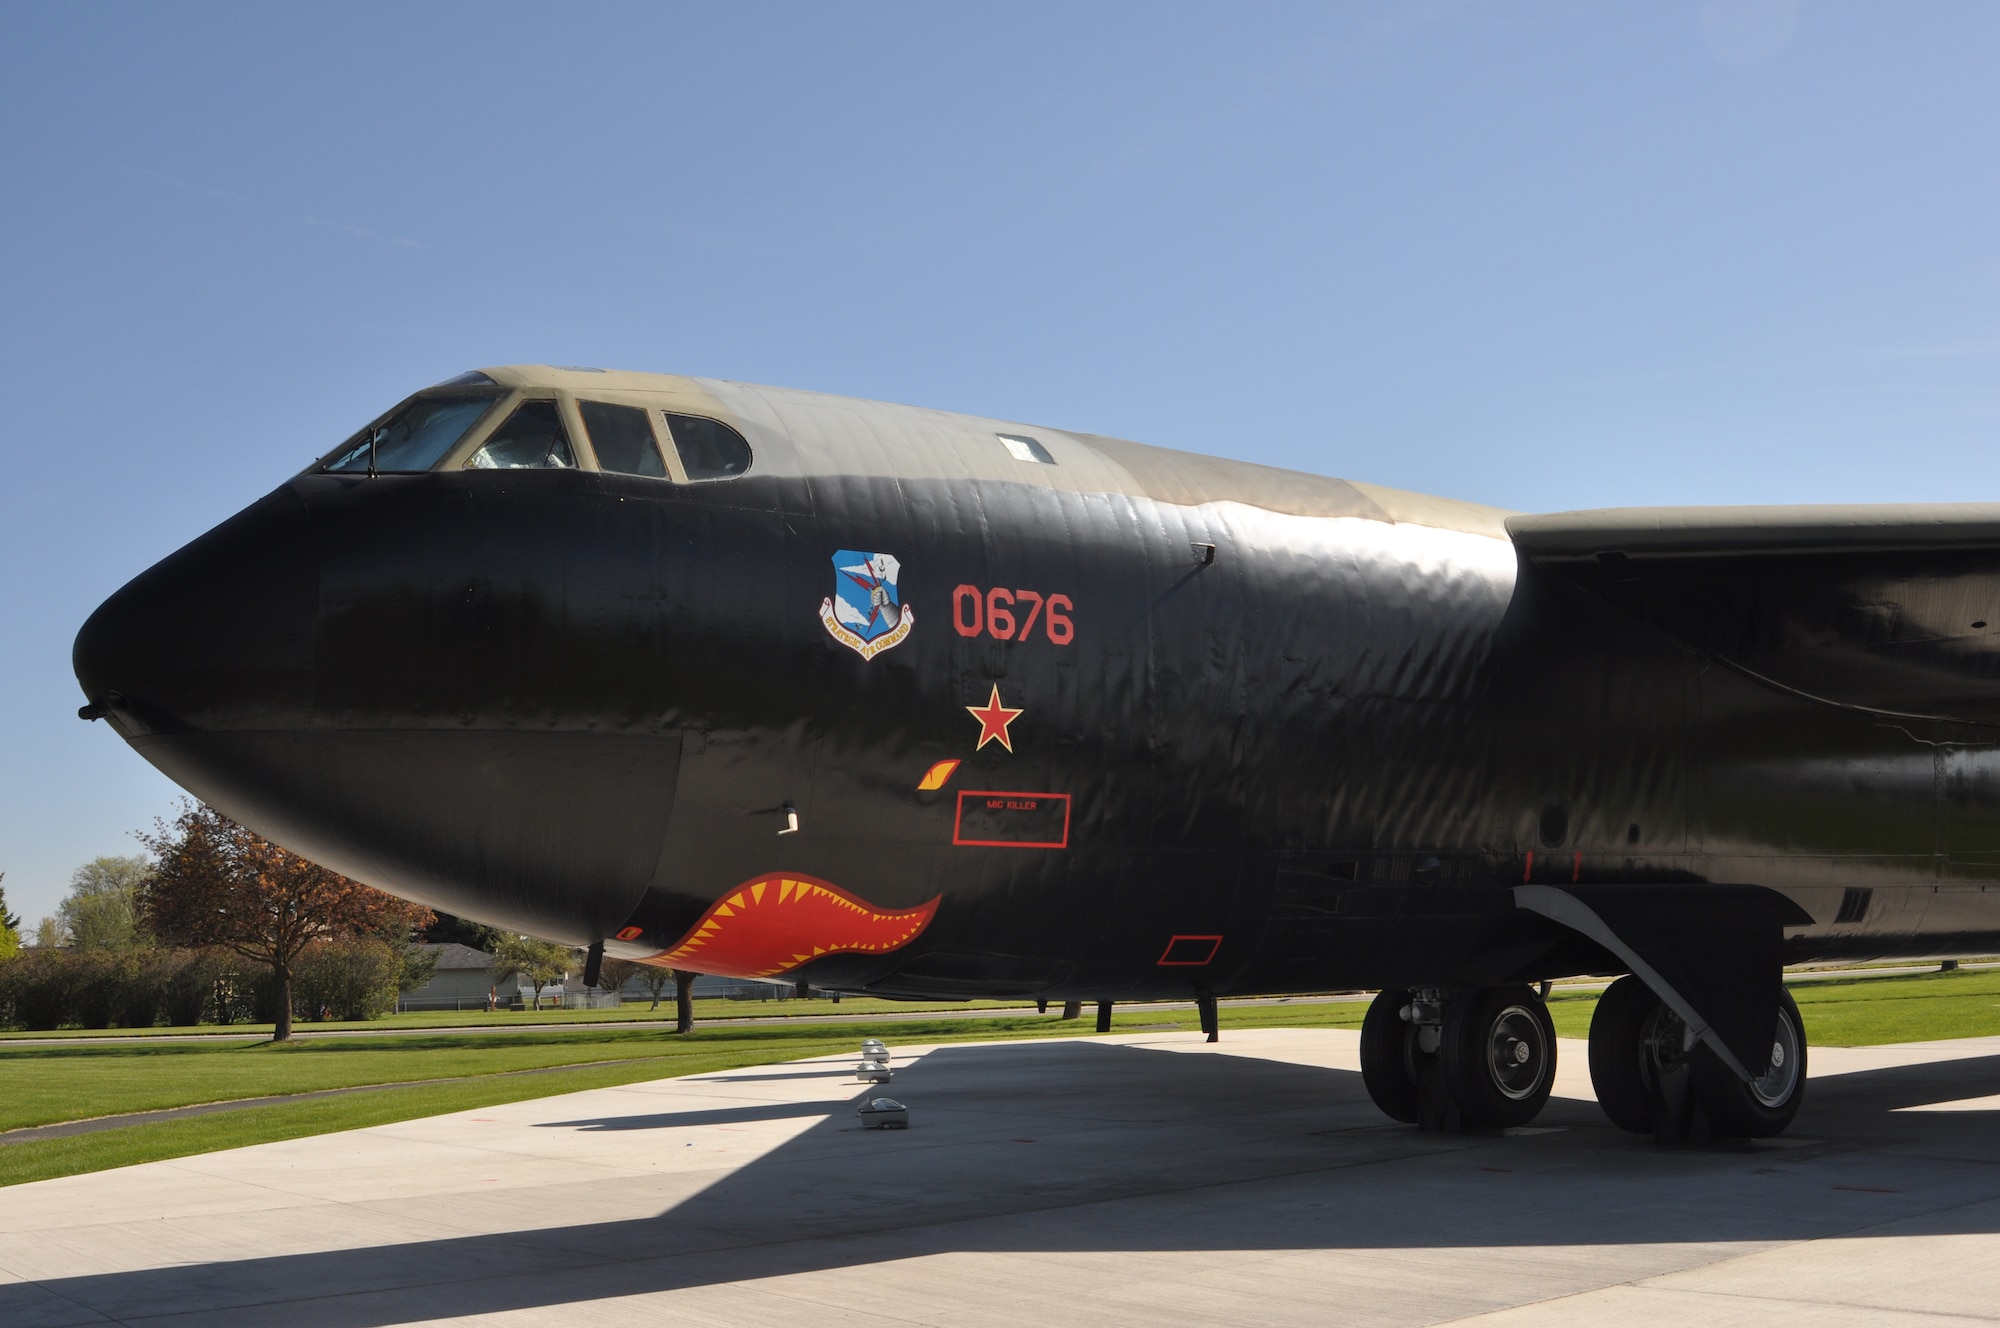 A B-52 Stratofortress static display, tail “676,” sits dominantly at the Fairchild Air Force Base, Wash., Heritage Park May 8, 2012. On Dec. 18, 1972, during Linebacker II operations over North Vietnam, “676” became the first B-52 to shoot down an enemy MiG aircraft. The tail gunner, Staff Sgt. Samuel O. Turner, fired his 50-caliber machine guns at a MiG-21 as it moved in to attack the B-52. Turner reported a “gigantic explosion to the rear of the aircraft” and was credited with being the first tail gunner to log a confirmed kill during combat in a B-52. (U.S. Air Force photo by Scott King/Released)